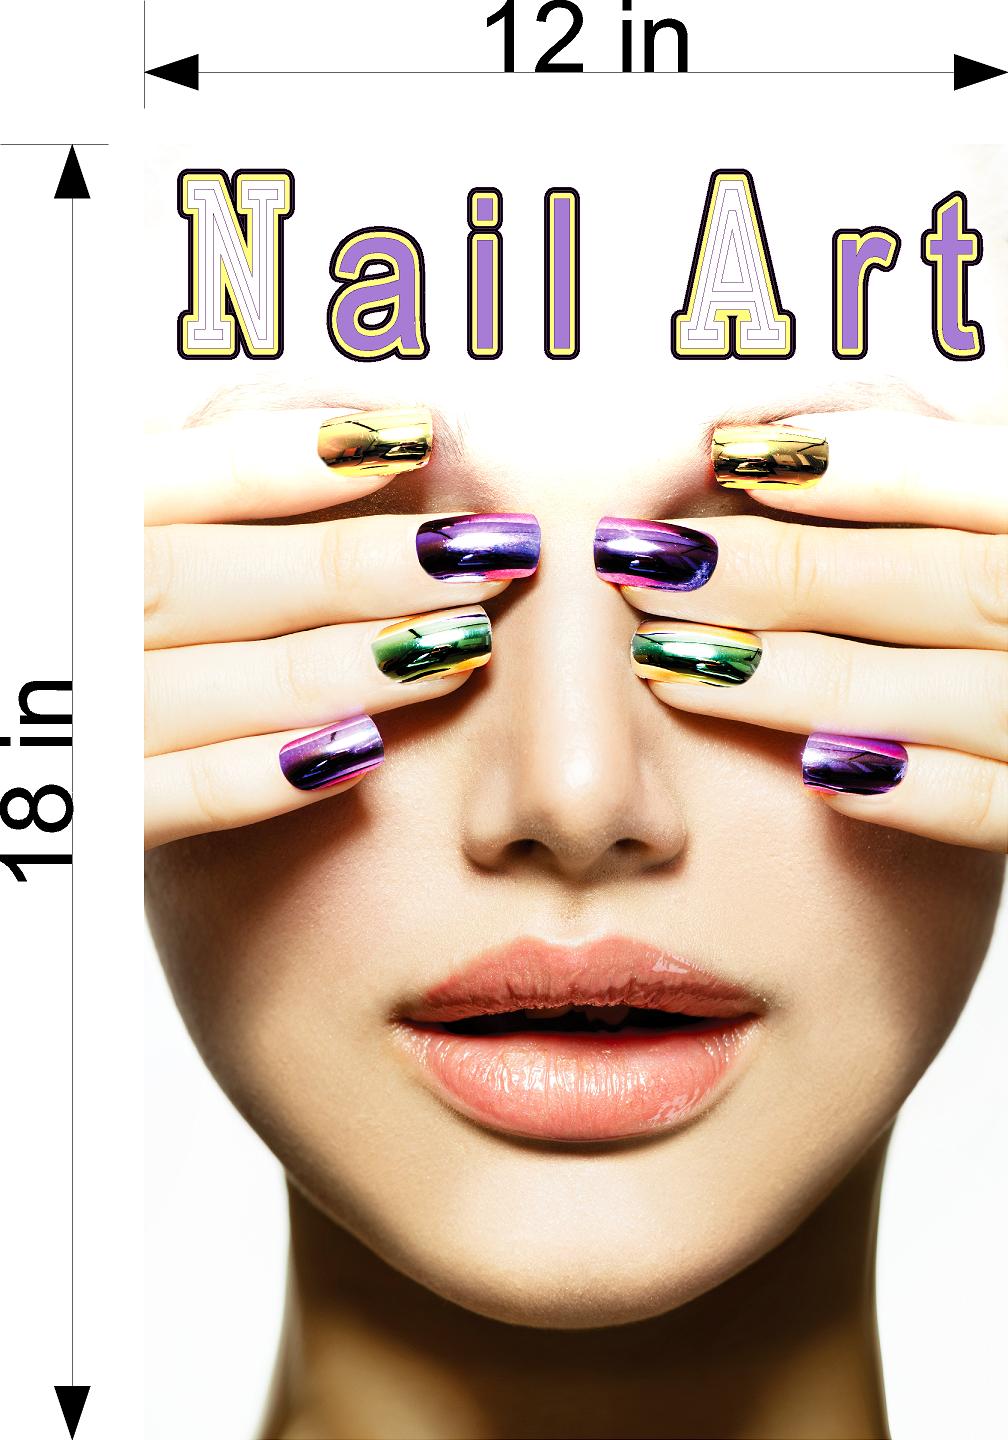 Nail Art 08 Wallpaper Poster Decal with Adhesive Backing Wall Sticker Decor Indoors Interior Sign Vertical